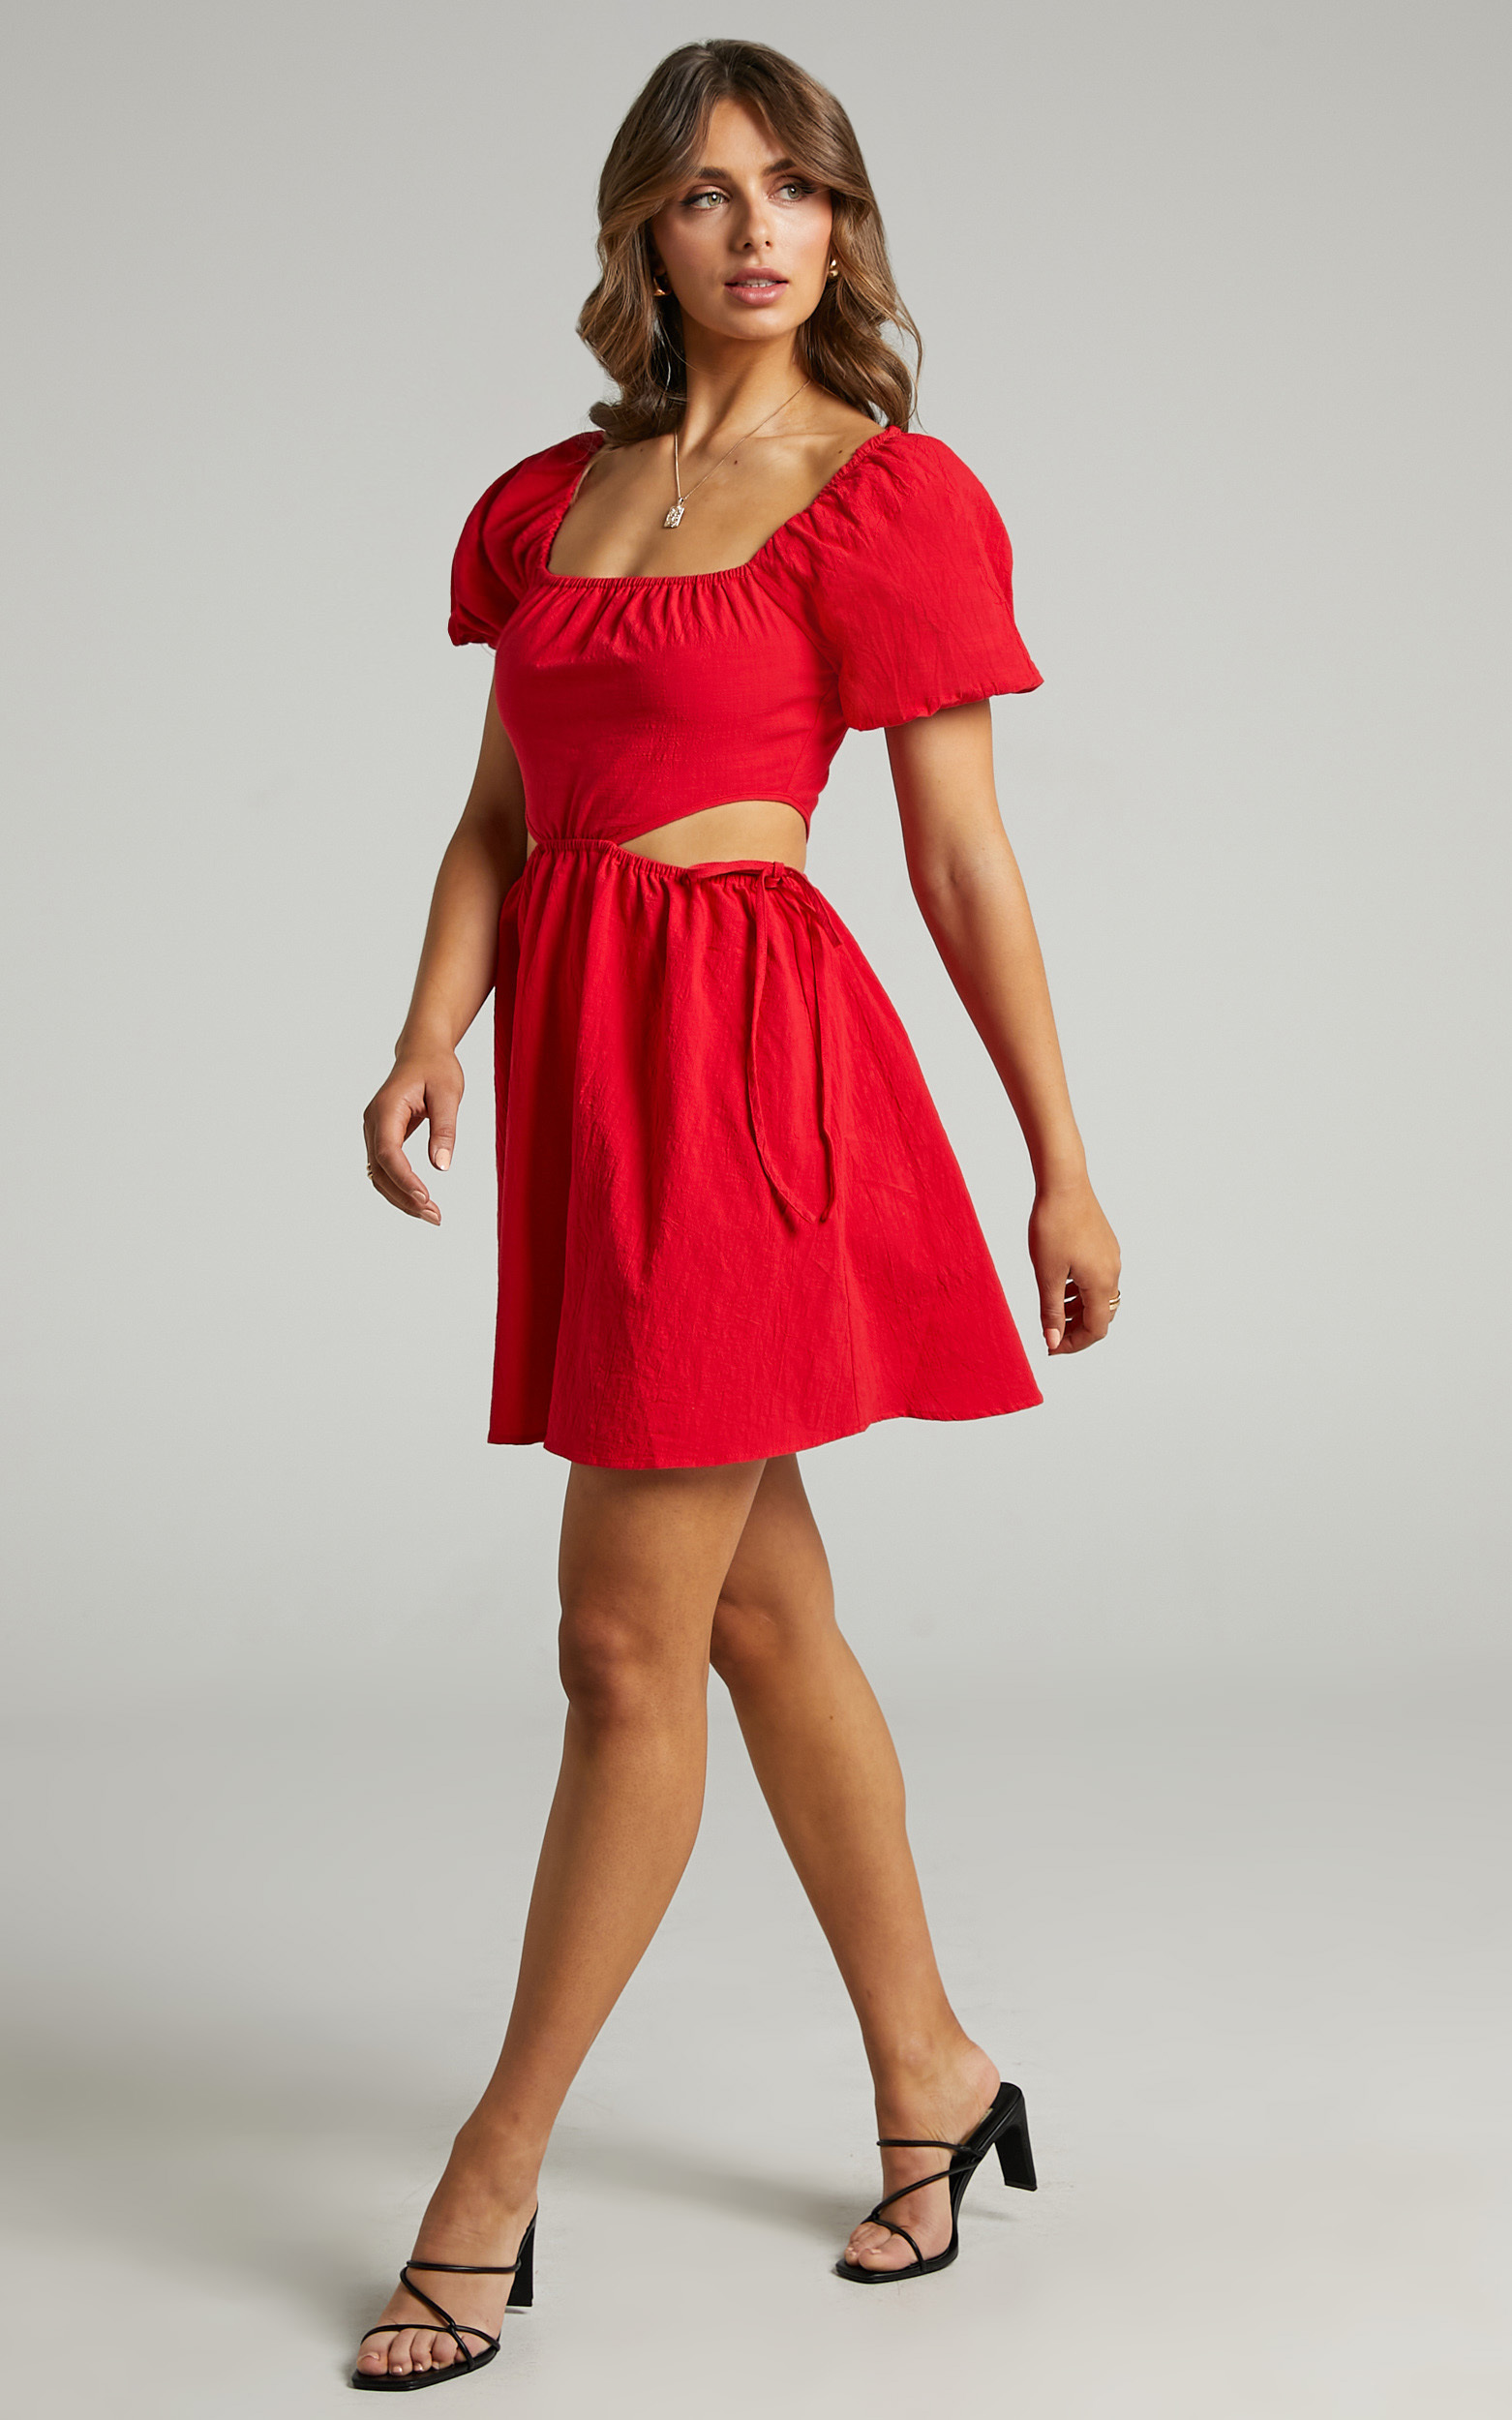 Loriella Waist Cut Out Skater Skirt Dress in Red - 06, RED2, hi-res image number null